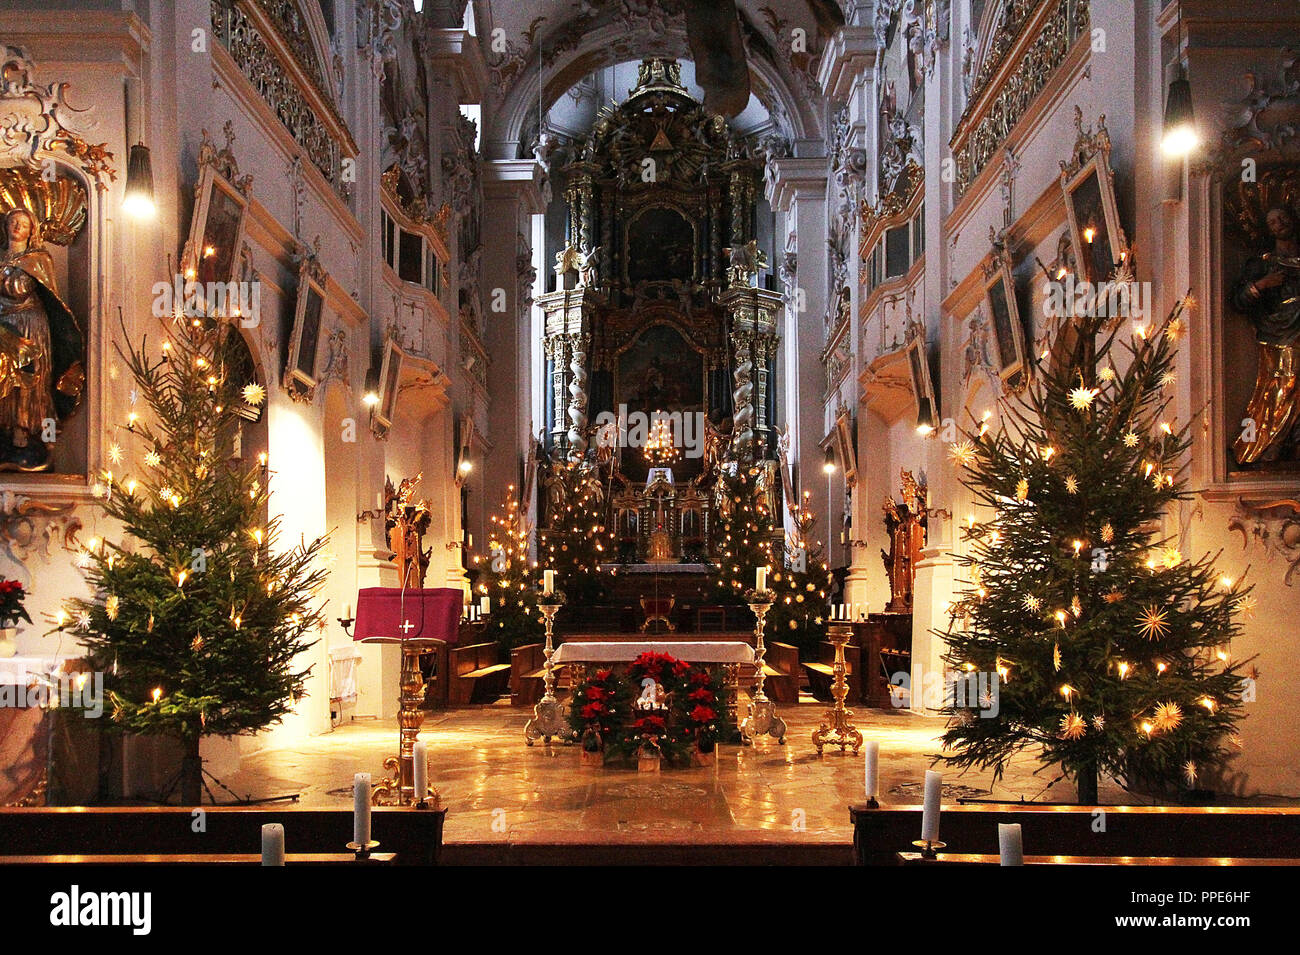 The sanctuary of the Klosterkirche Mariae Himmelfahrt (Church of the Assumption of the Virgin Mary) in Indersdorf is festively decorated for Christmas. Stock Photo